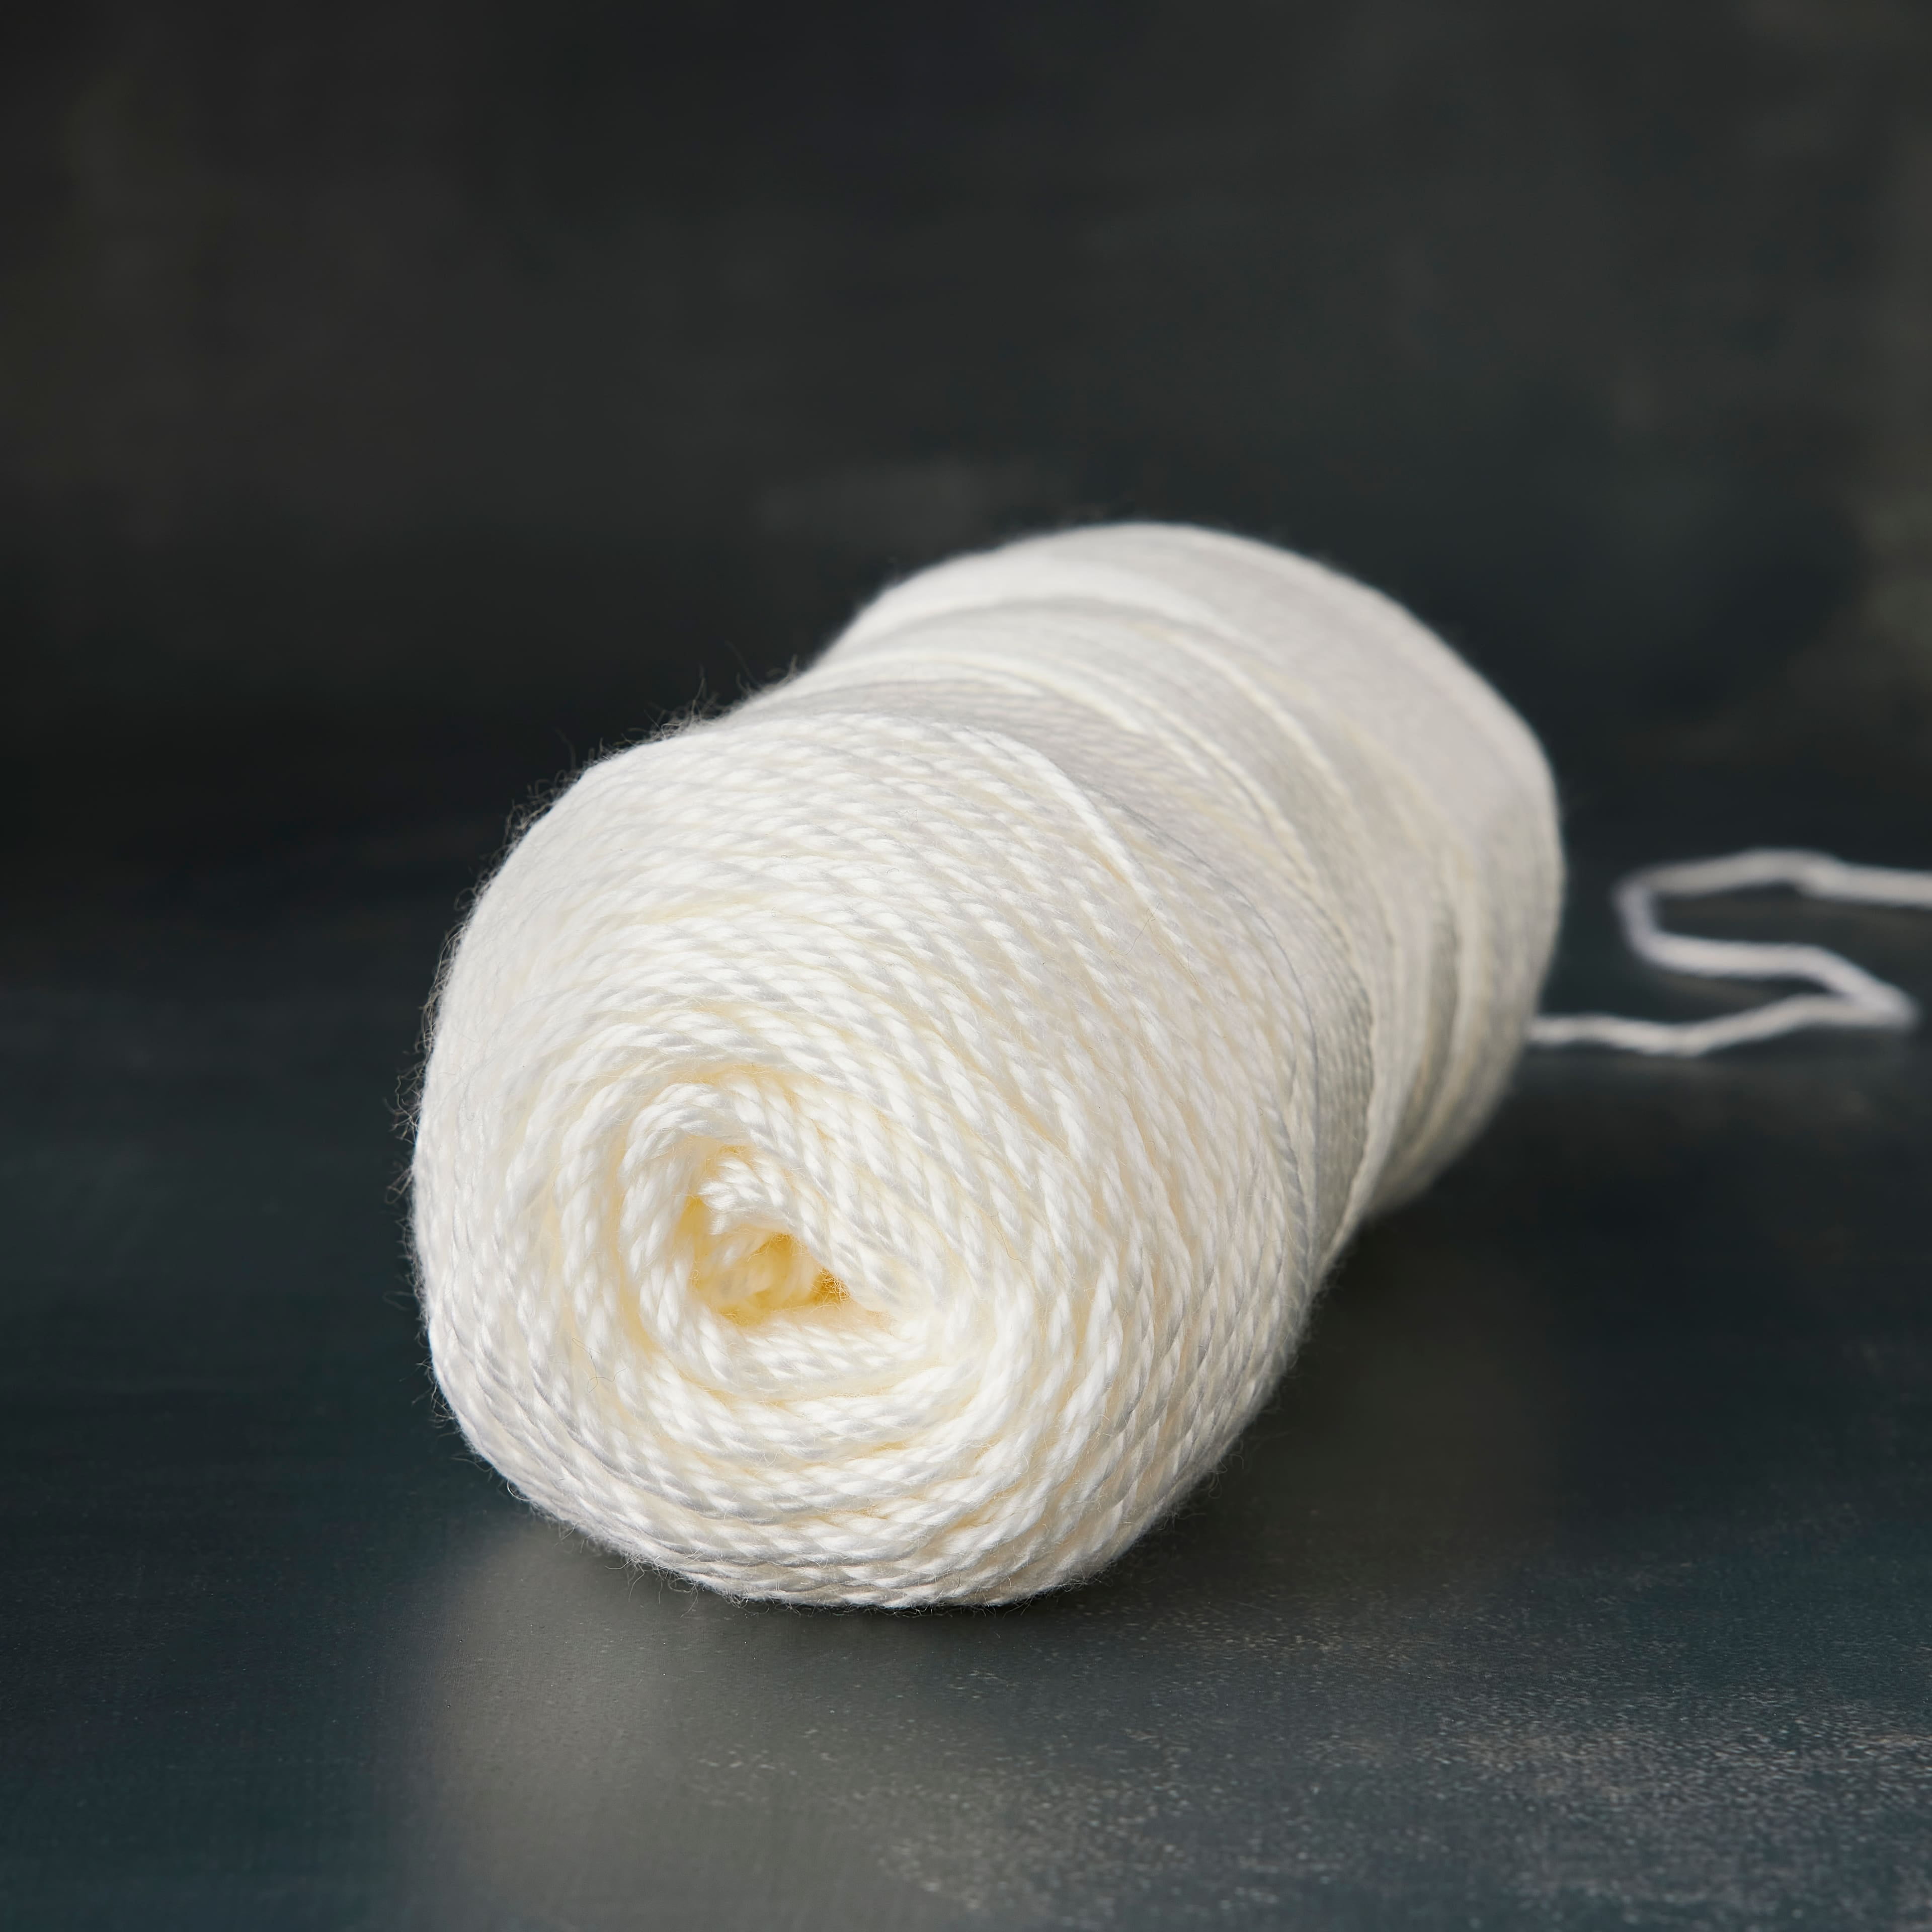 CIKONZA SUPPER SOFT SHINY AND THICK BLANKET YARN THREAD - SUPPER SOFT SHINY  AND THICK BLANKET YARN THREAD . shop for CIKONZA products in India.